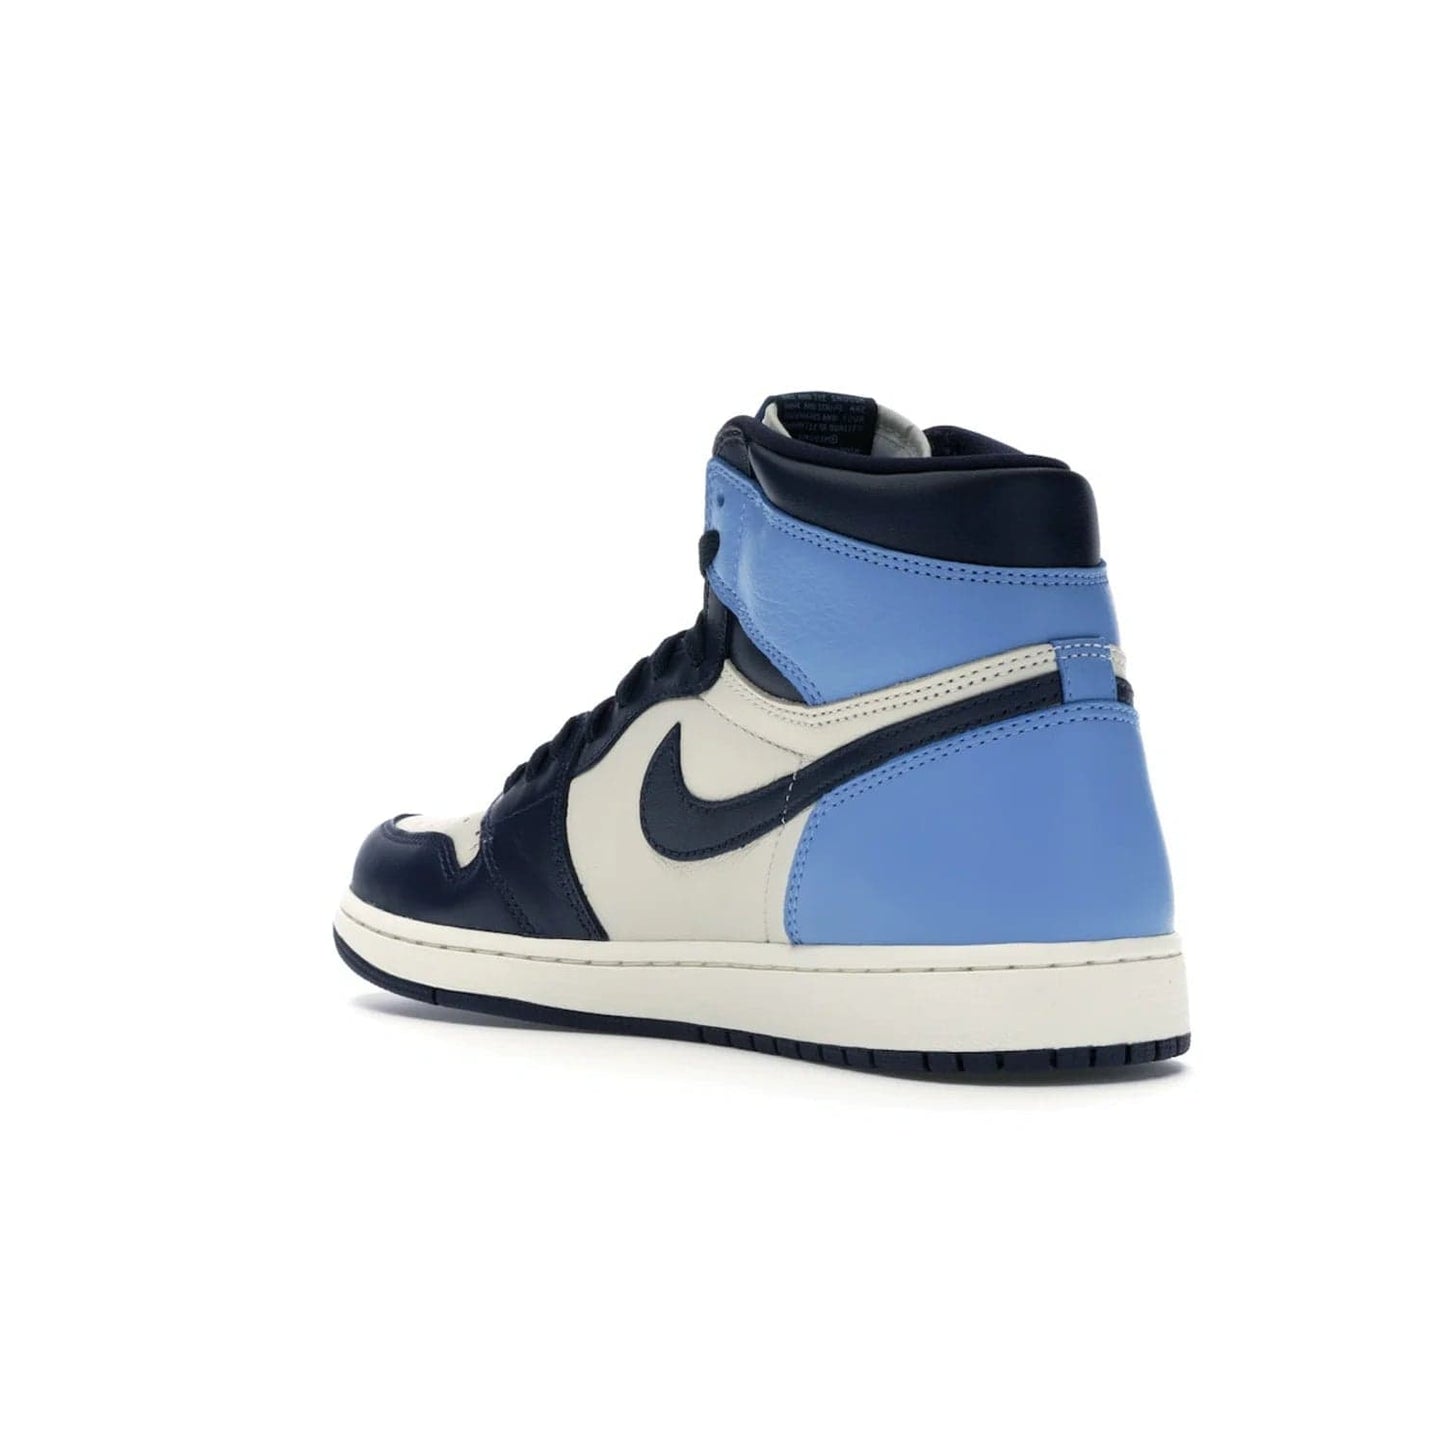 Jordan 1 Retro High Obsidian UNC - Image 24 - Only at www.BallersClubKickz.com - Bring a timeless classic to your wardrobe with the Air Jordan 1 Retro High "Obsidian/University Blue”. A full leather upper combines Obsidian and University Blue detailing for a retro Jordan style. Stitched Jumpman logo pays tribute to UNC. Experience classic style with a timeless sneaker.